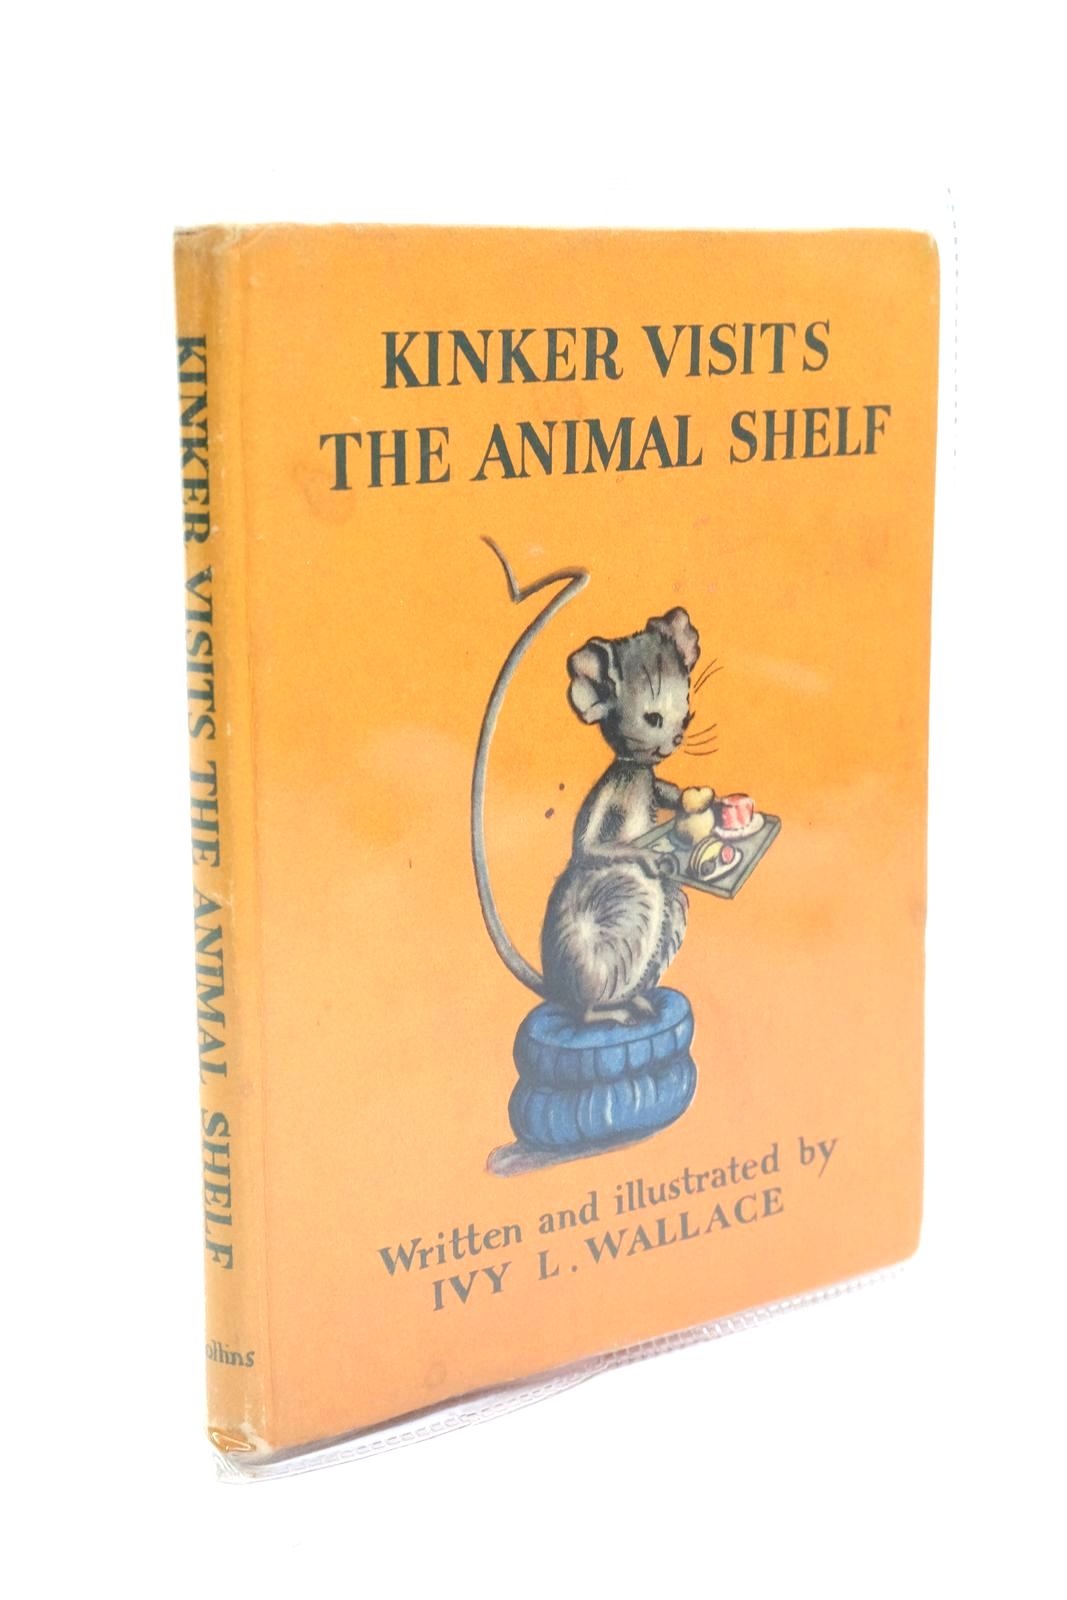 Photo of KINKER VISITS THE ANIMAL SHELF written by Wallace, Ivy L. illustrated by Wallace, Ivy L. published by Collins (STOCK CODE: 1322388)  for sale by Stella & Rose's Books